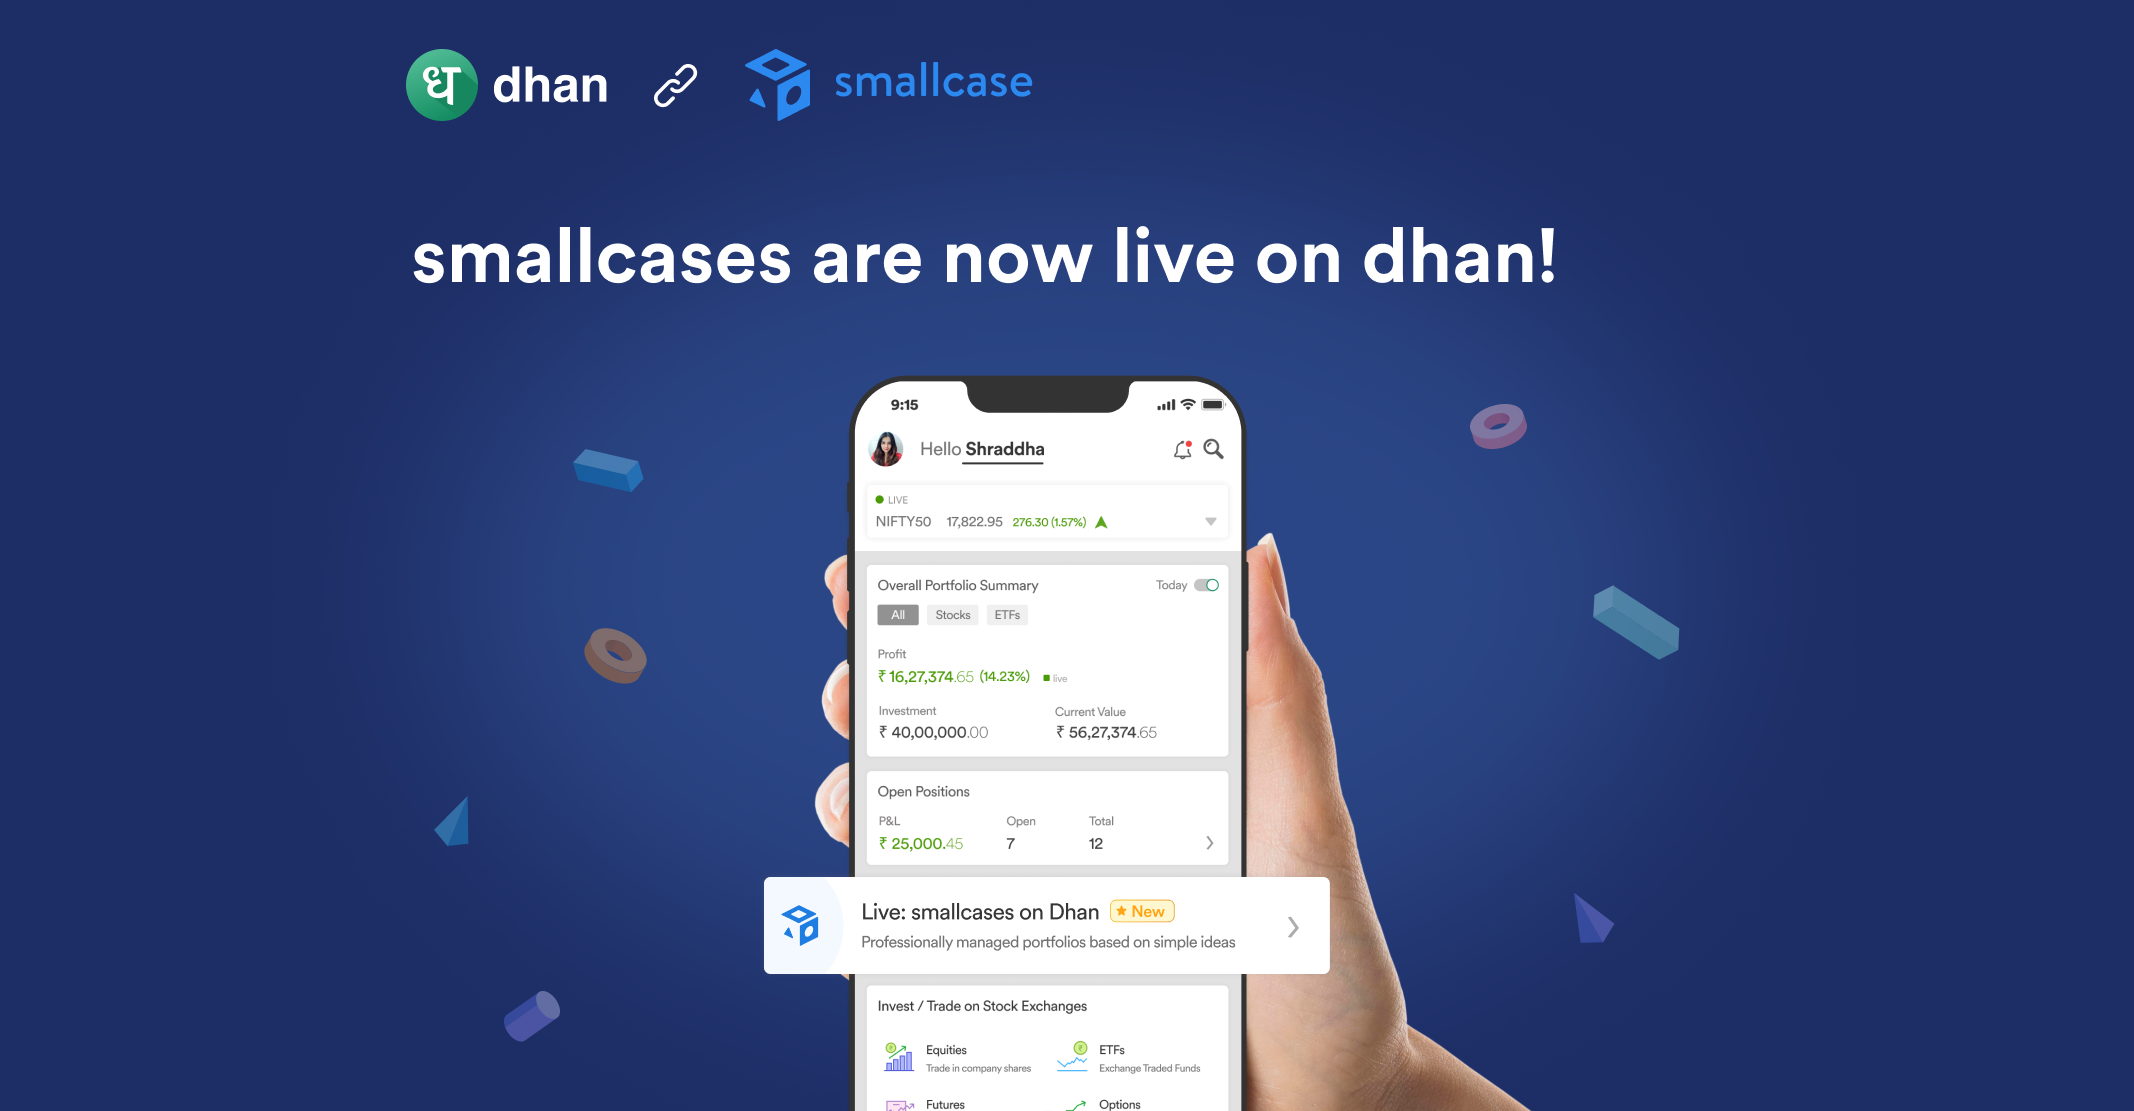 smallcases on Dhan - Start Investing in Ideas with smallcases!